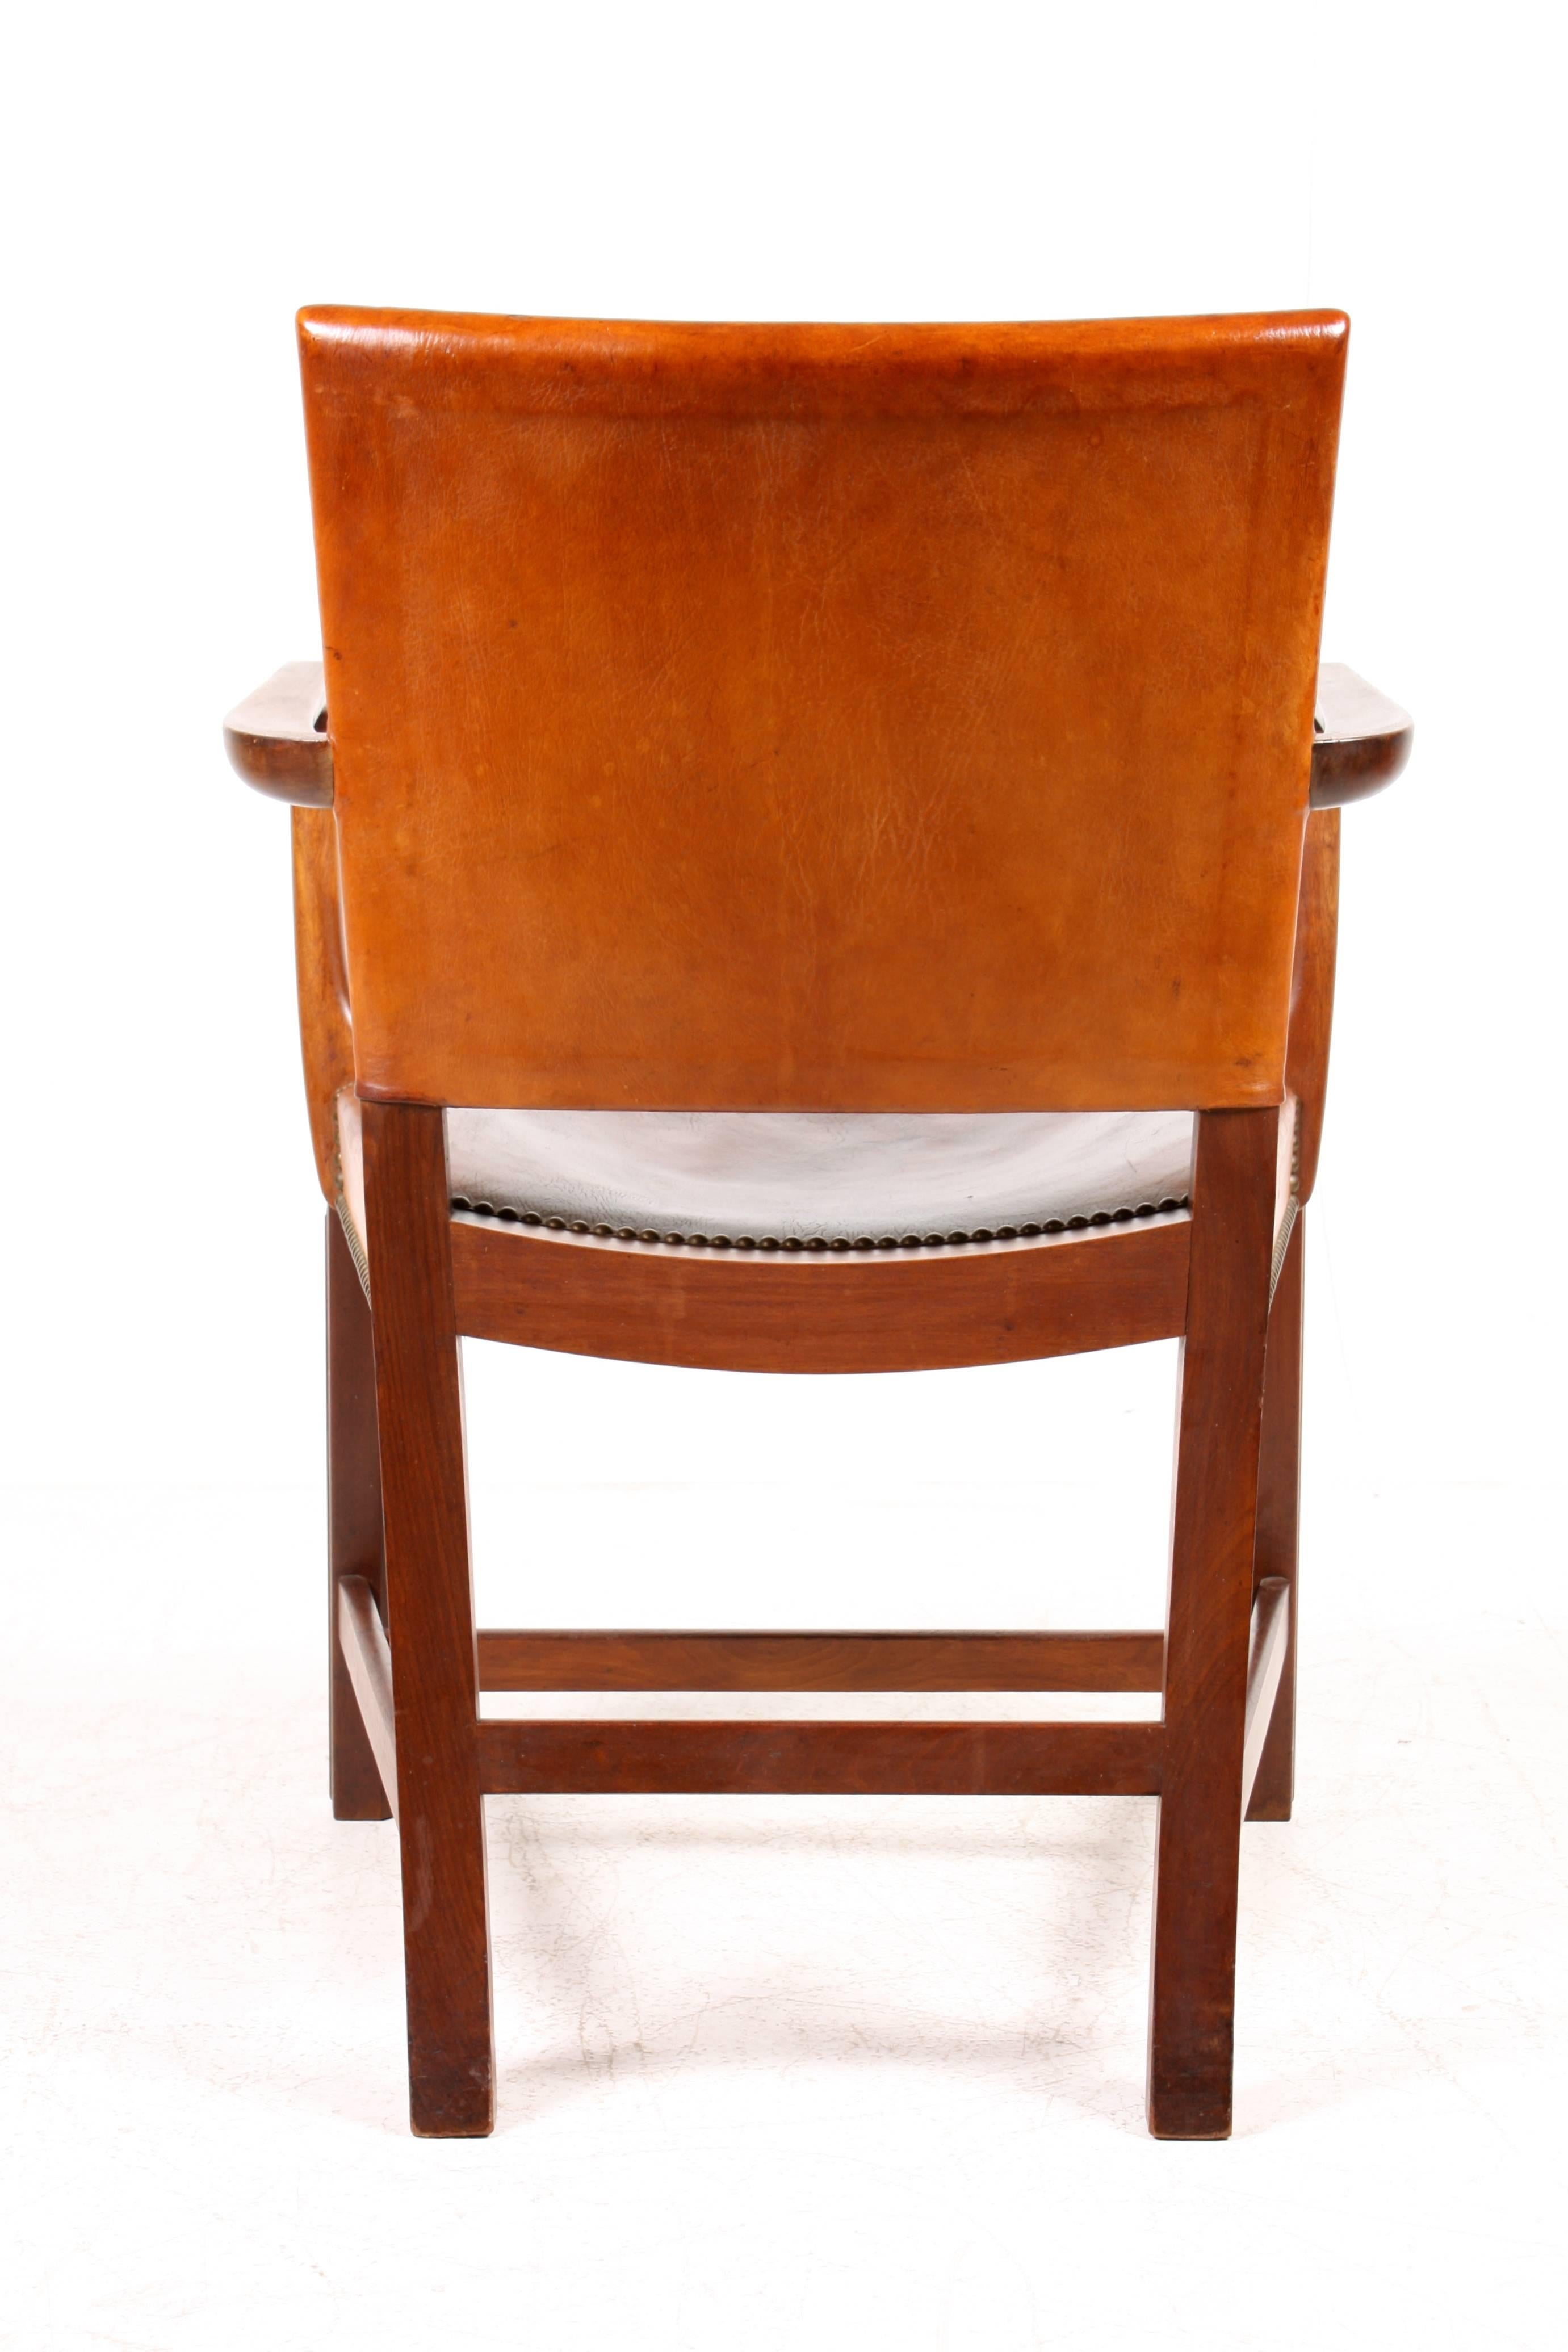 Red Chair by Kaare Klint in Cuban Mahogany and patnated Niger leather. Designed by Kaare Klint, Made by Rud Rasmussen Denmark. Original condition.